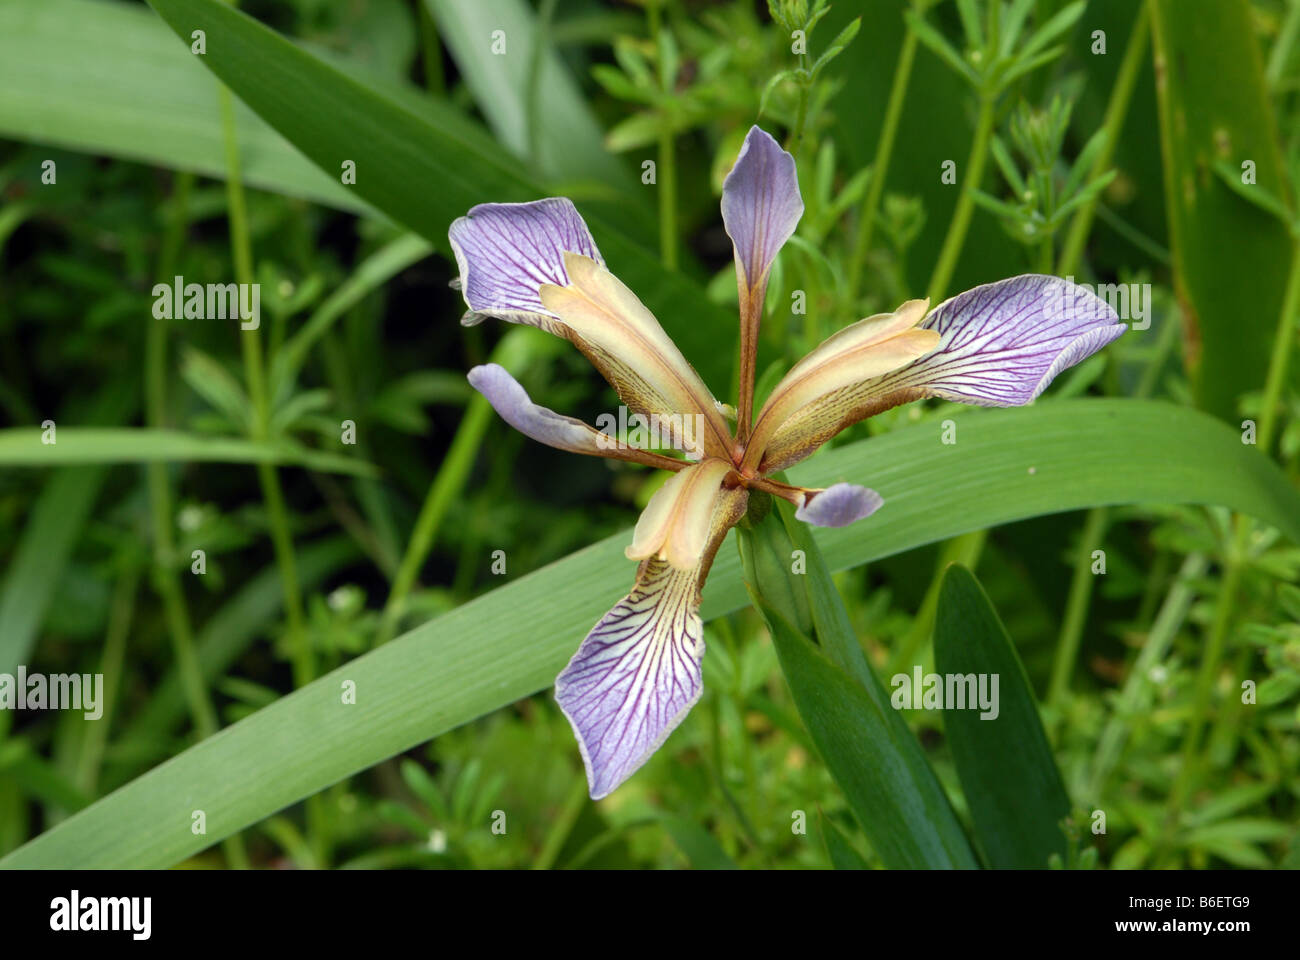 Iris puant in close up Banque D'Images